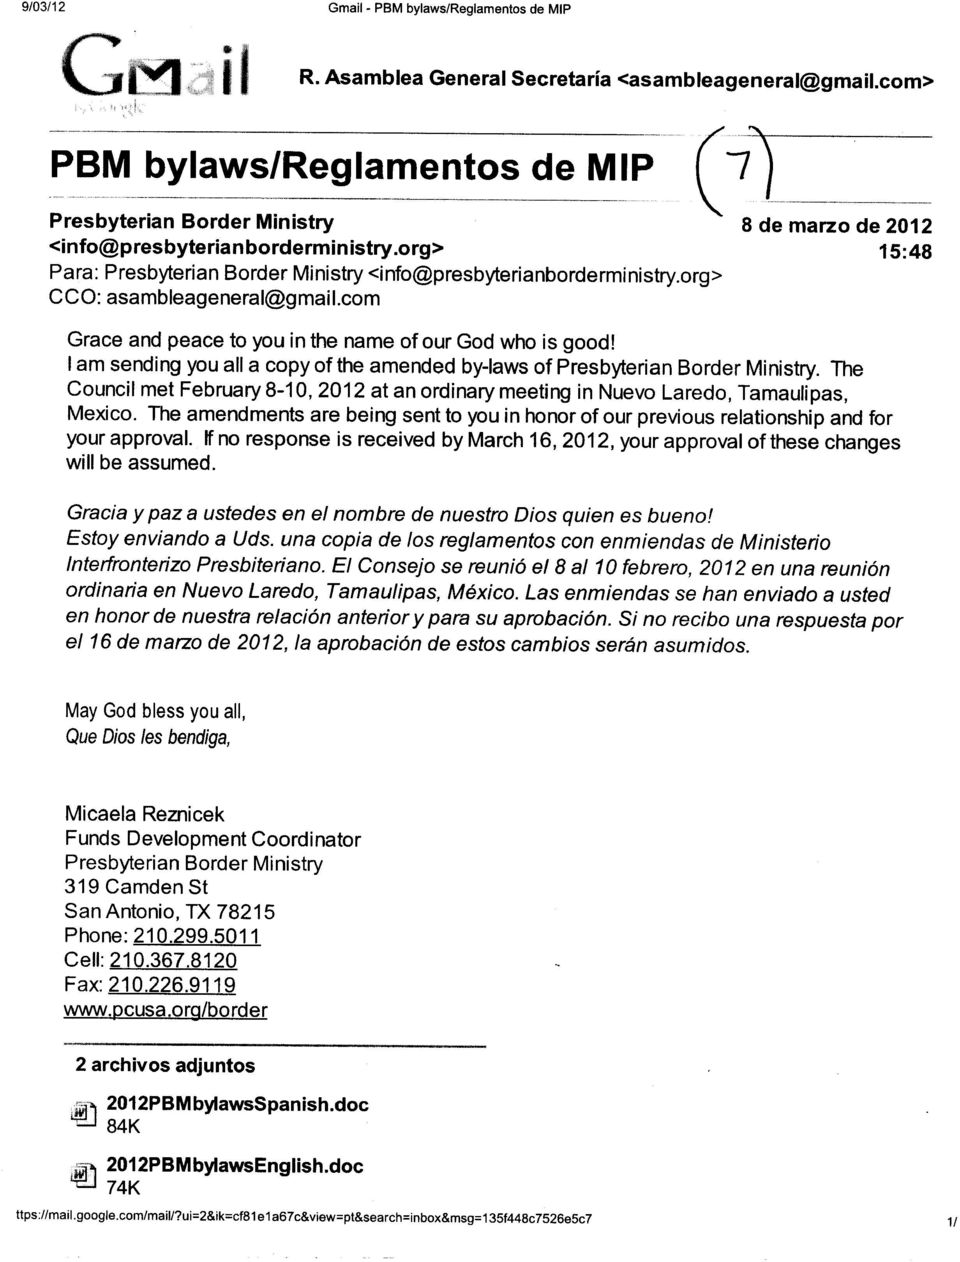 I am sending you all a copy ofthe amended by-iaws of Presbyterian Border Ministry. The Council met February 8-10,2012 at an ordinary meeting in Nuevo Laredo, Tamaulipas, Mexico.